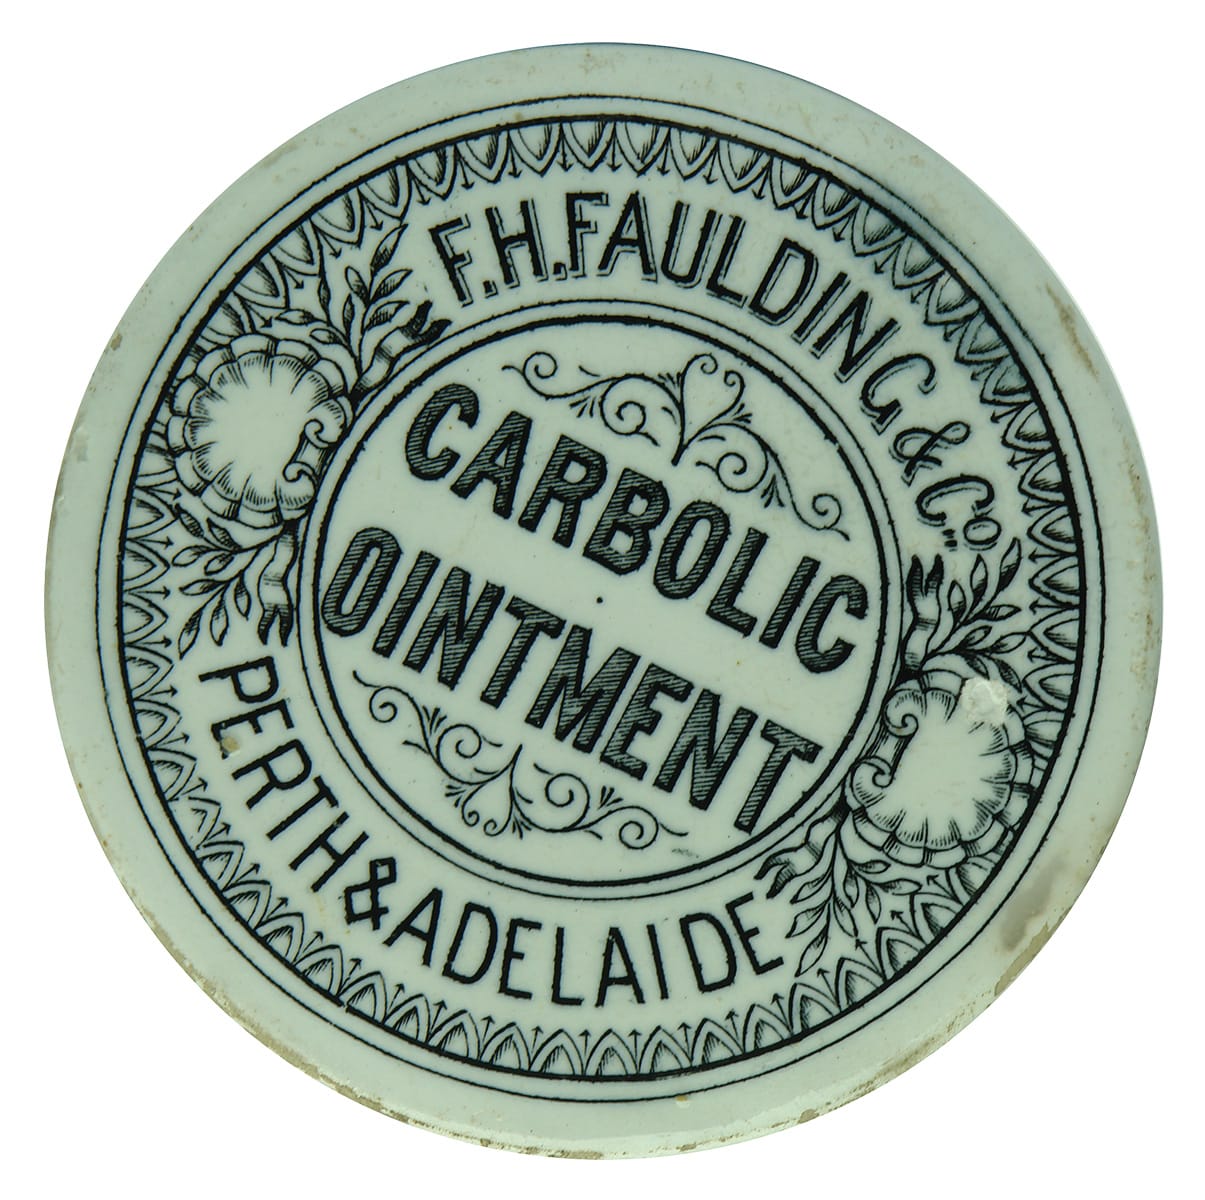 Faulding Carbolic Ointment Perth Adelaide Pot Lid